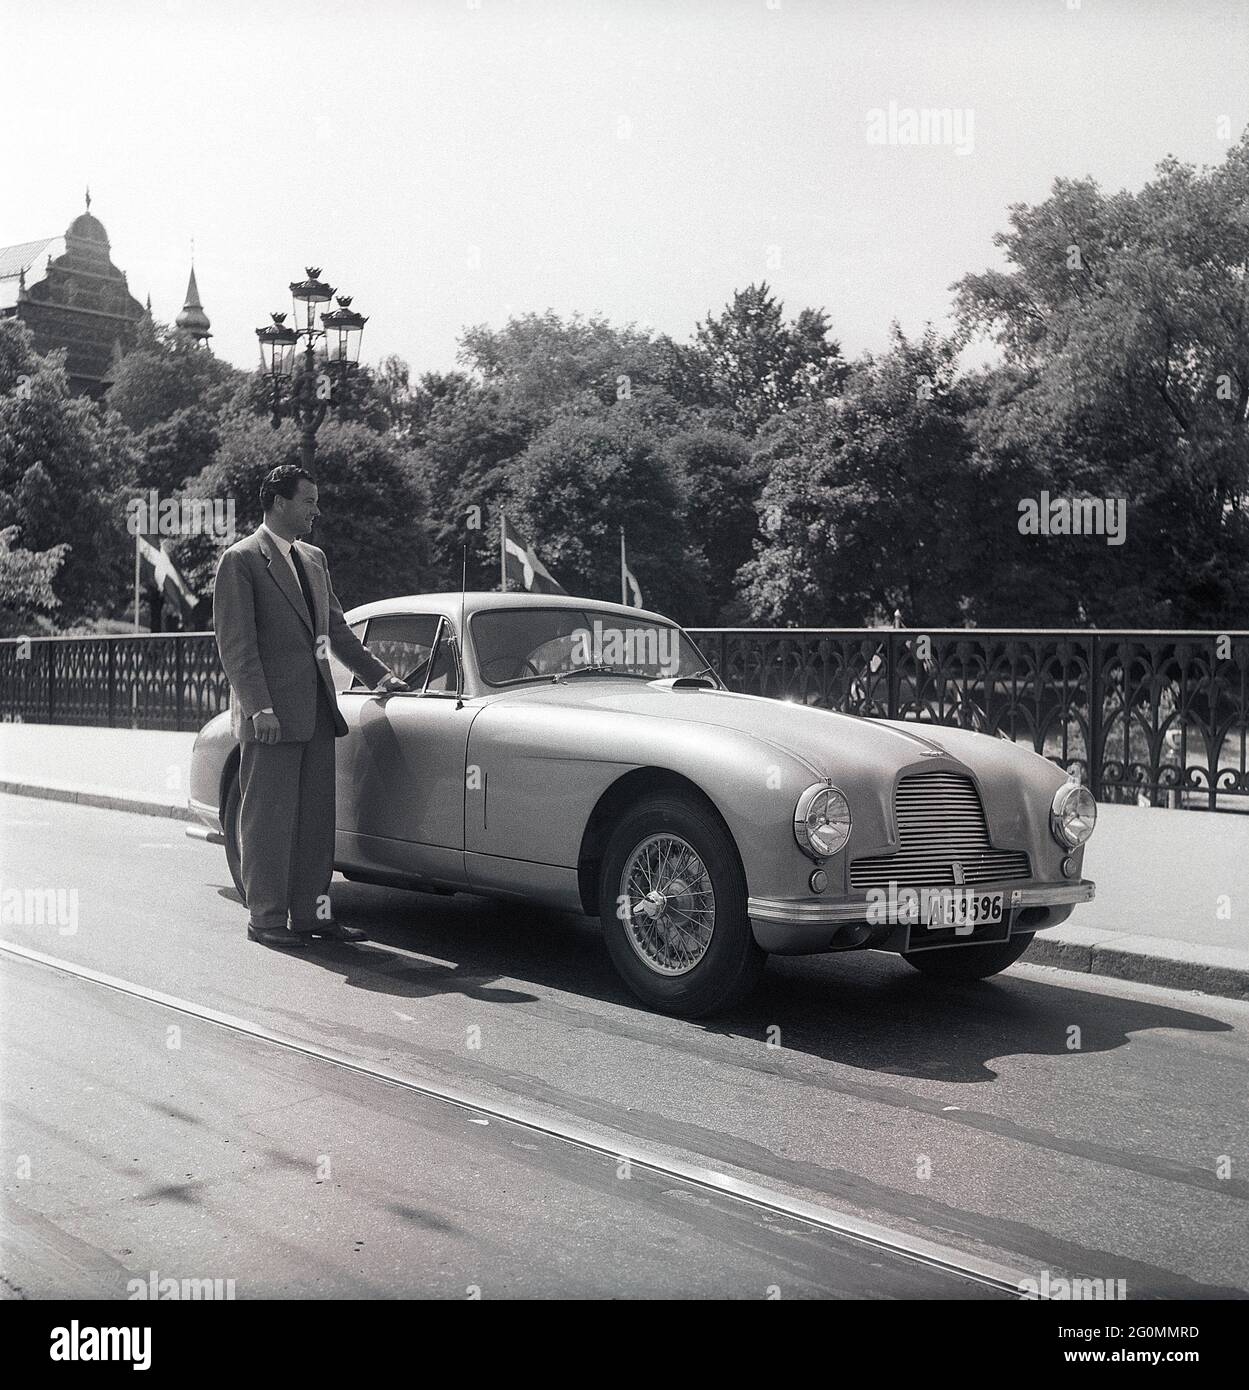 Driving in the 1950s. A man beside his car, an Aston Martin DB2. This model was presented in 1950 and was produced in 411 cars. It had a six cylindre engine, four gears and a chassi designed by Frank Feeley.  Sweden 1953. ref BL108-9 Stock Photo